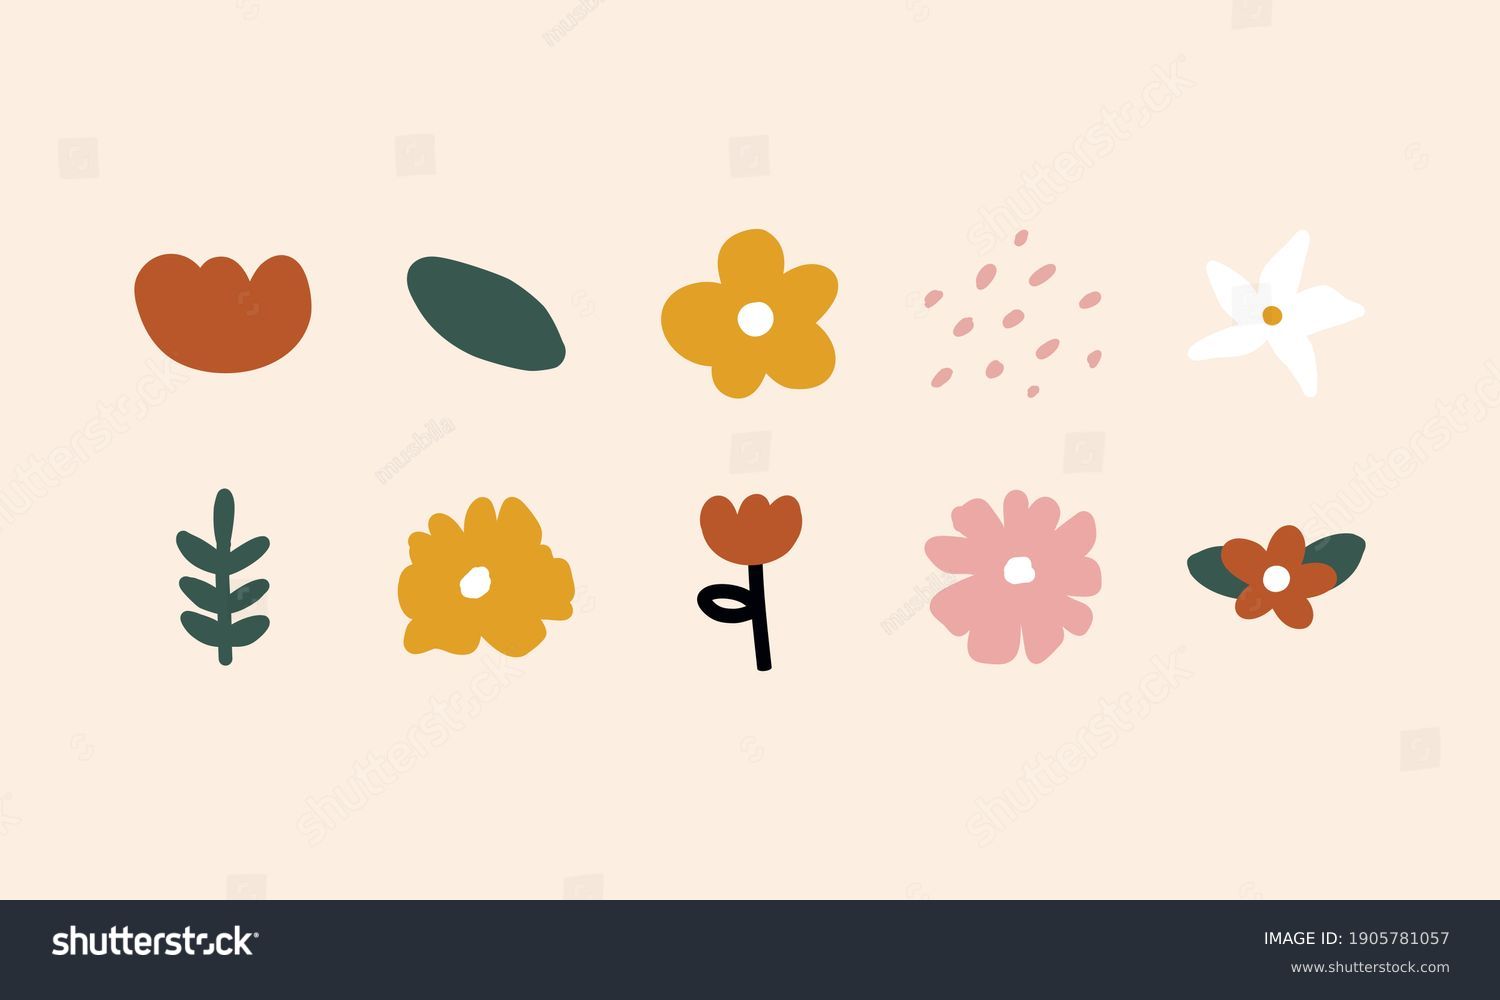 Simple Abstract hand drawn various shapes and doodle Botanical Nature flowers and Leaves objects contemporary modern trendy vector Elements illustration. #1905781057